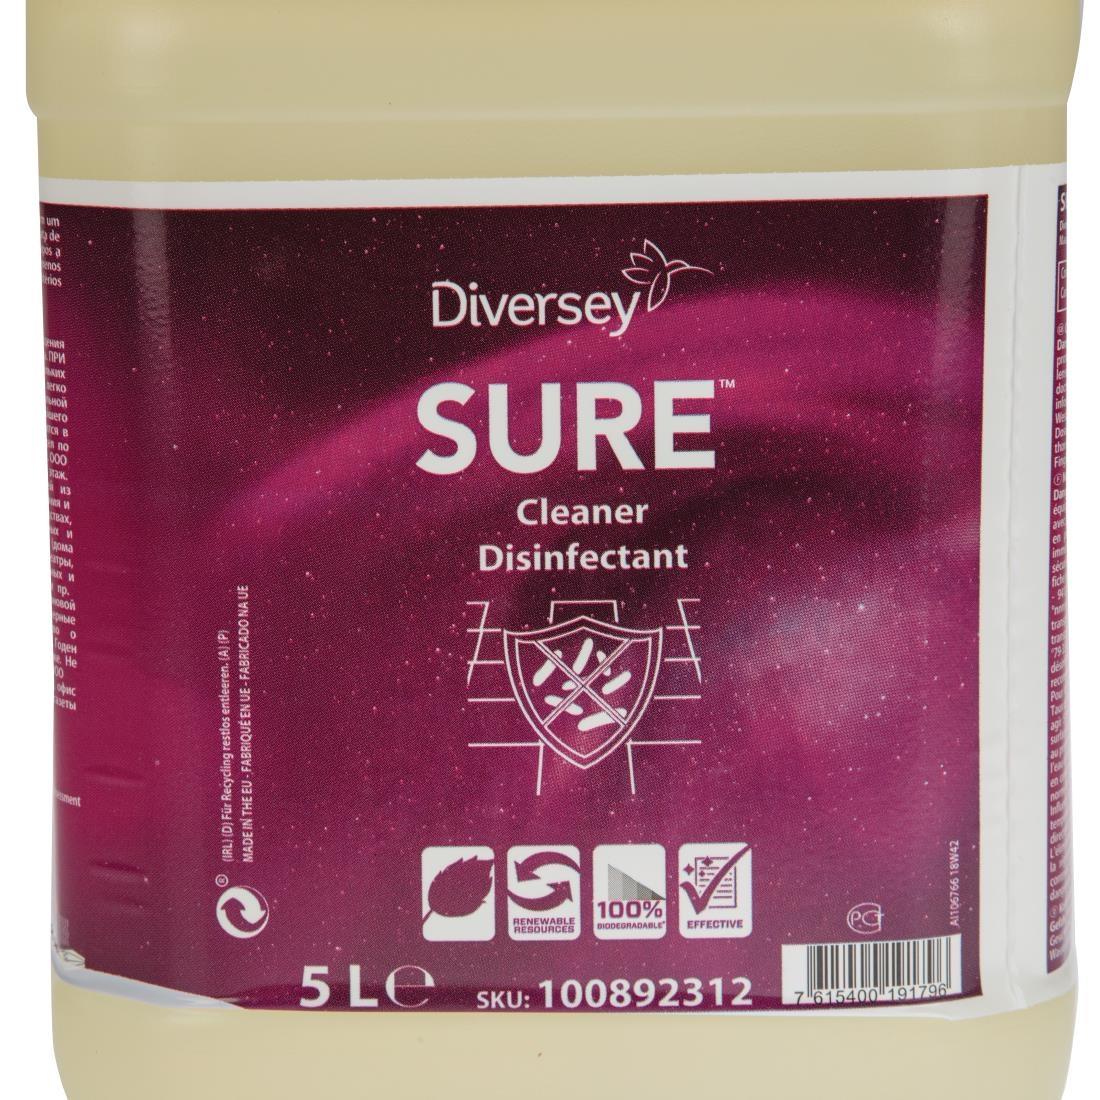 SURE Cleaner and Disinfectant Concentrate 5Ltr (2 Pack) - FA237  - 2